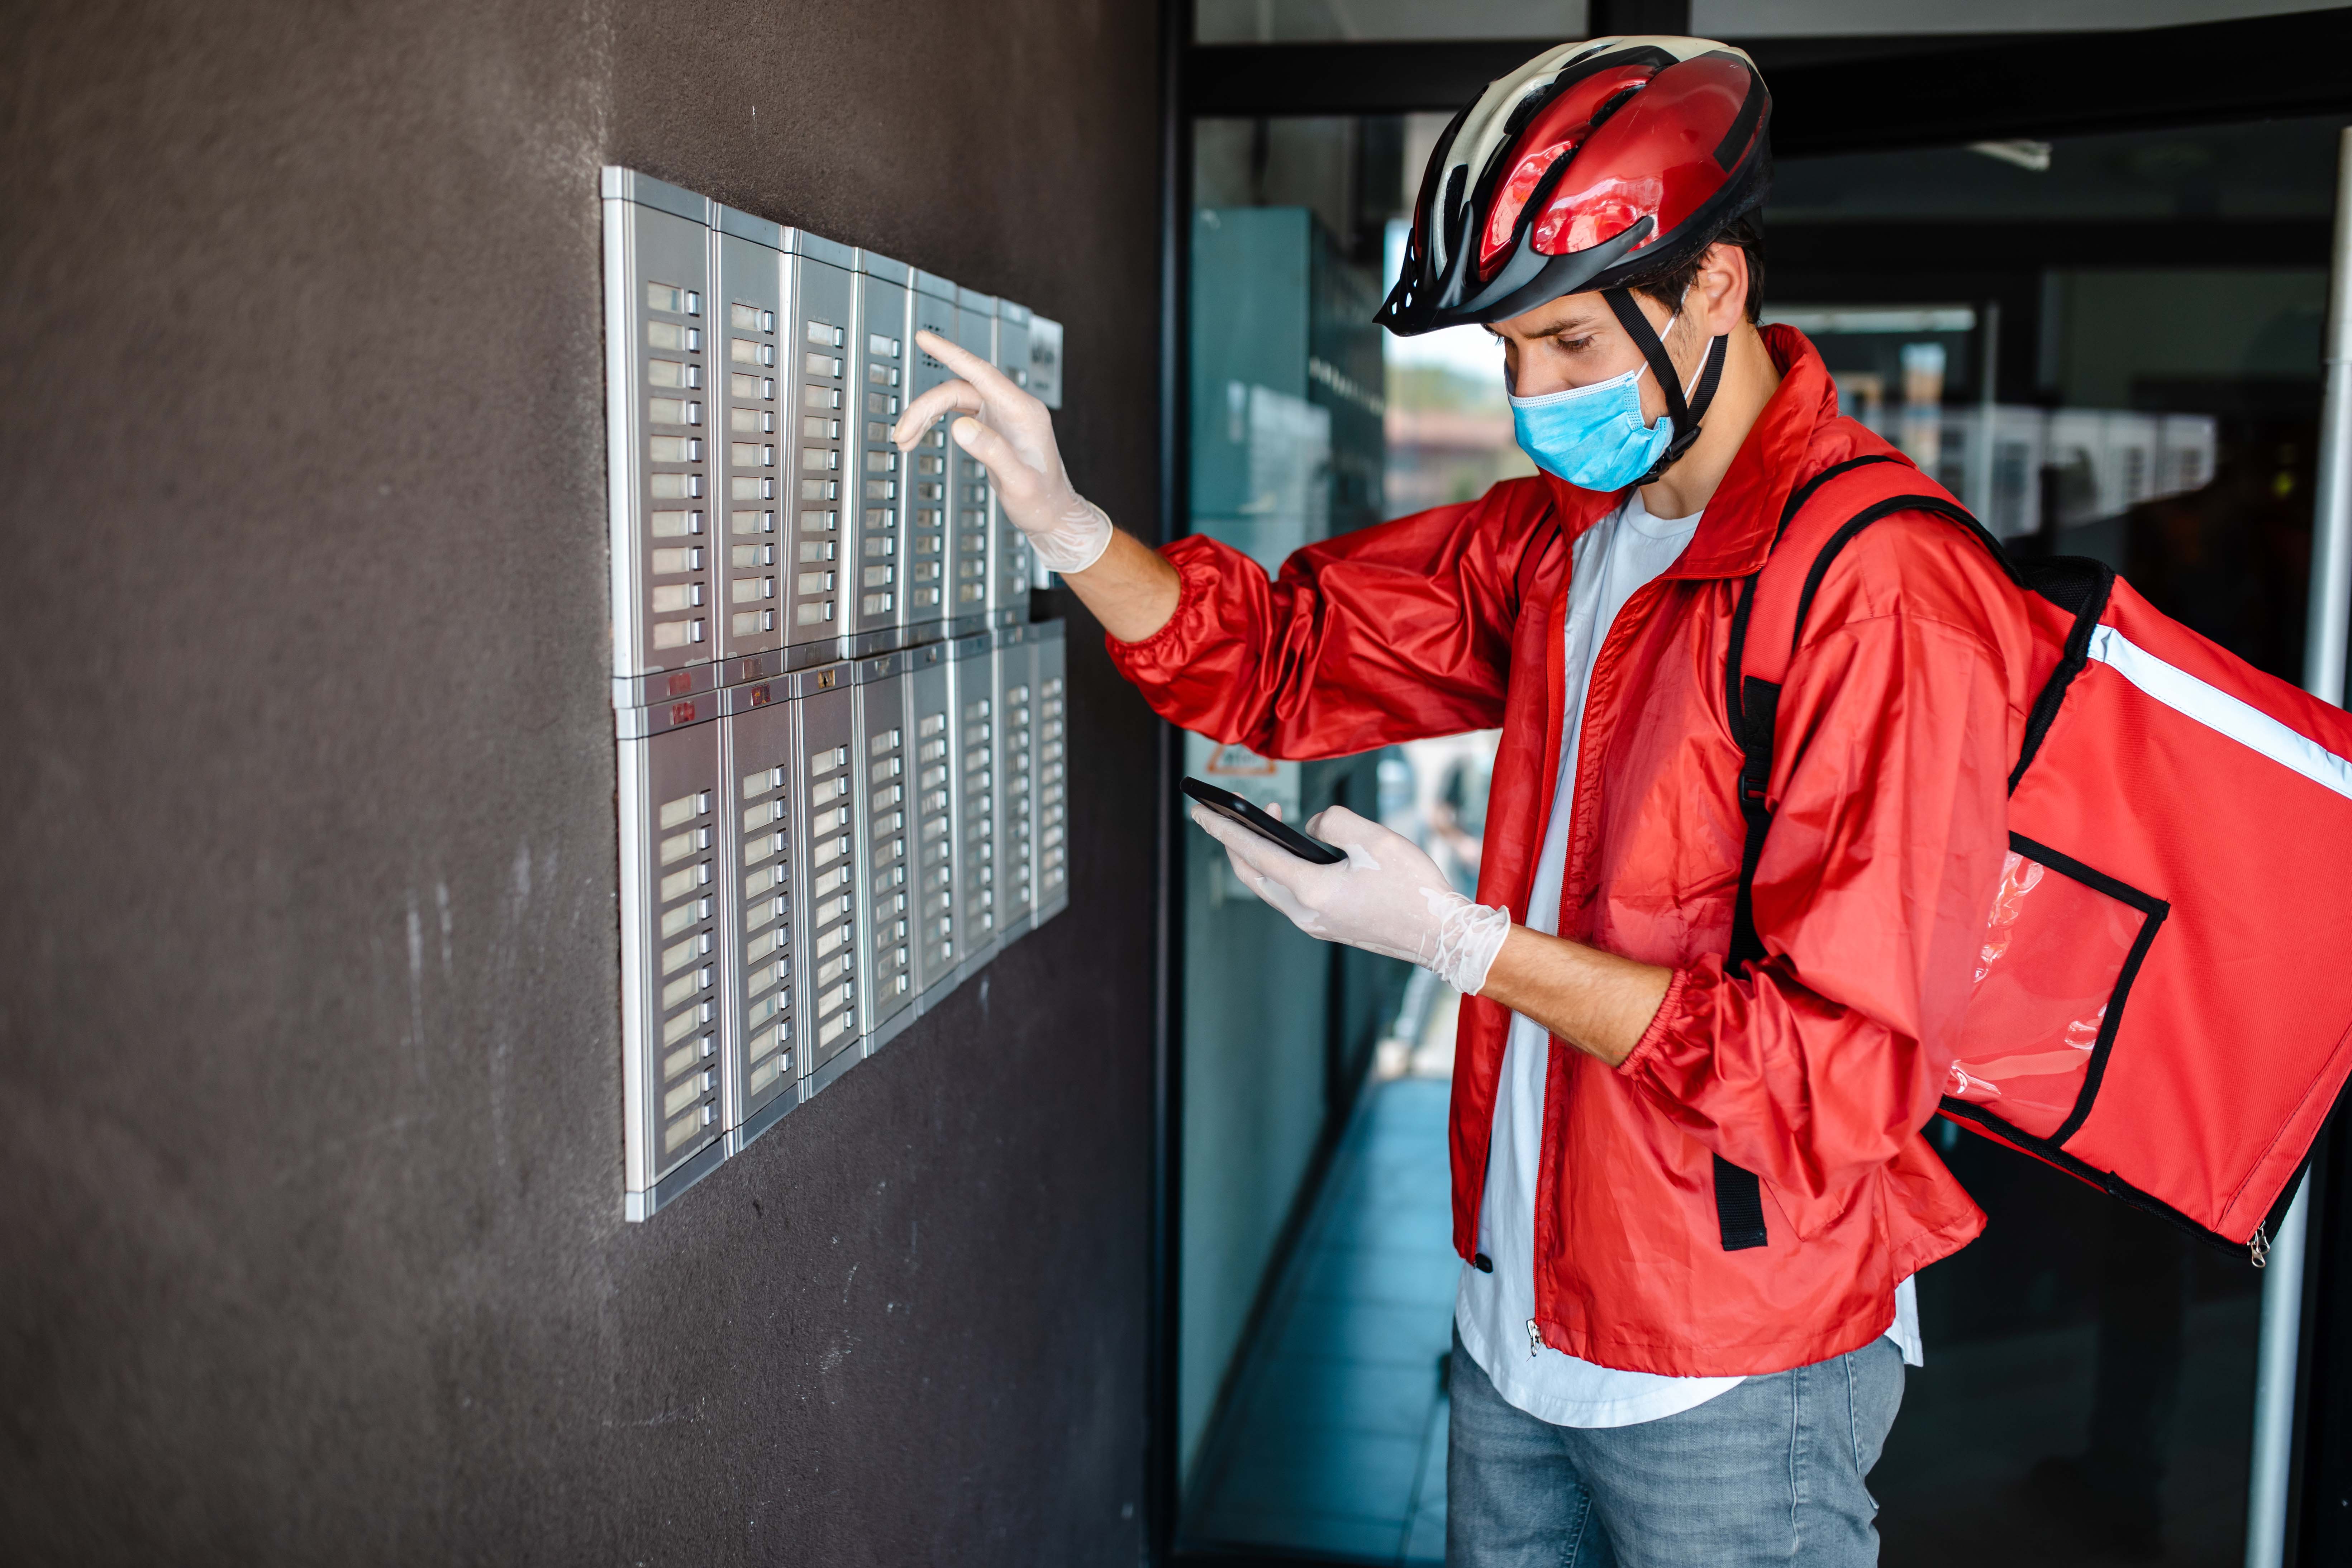 Young delivery person, riniging on intercom while checking the addres on his mobile phone, so he could deliver to a customer on time, while wearing protective gloves and face mask during corona virus pandemic